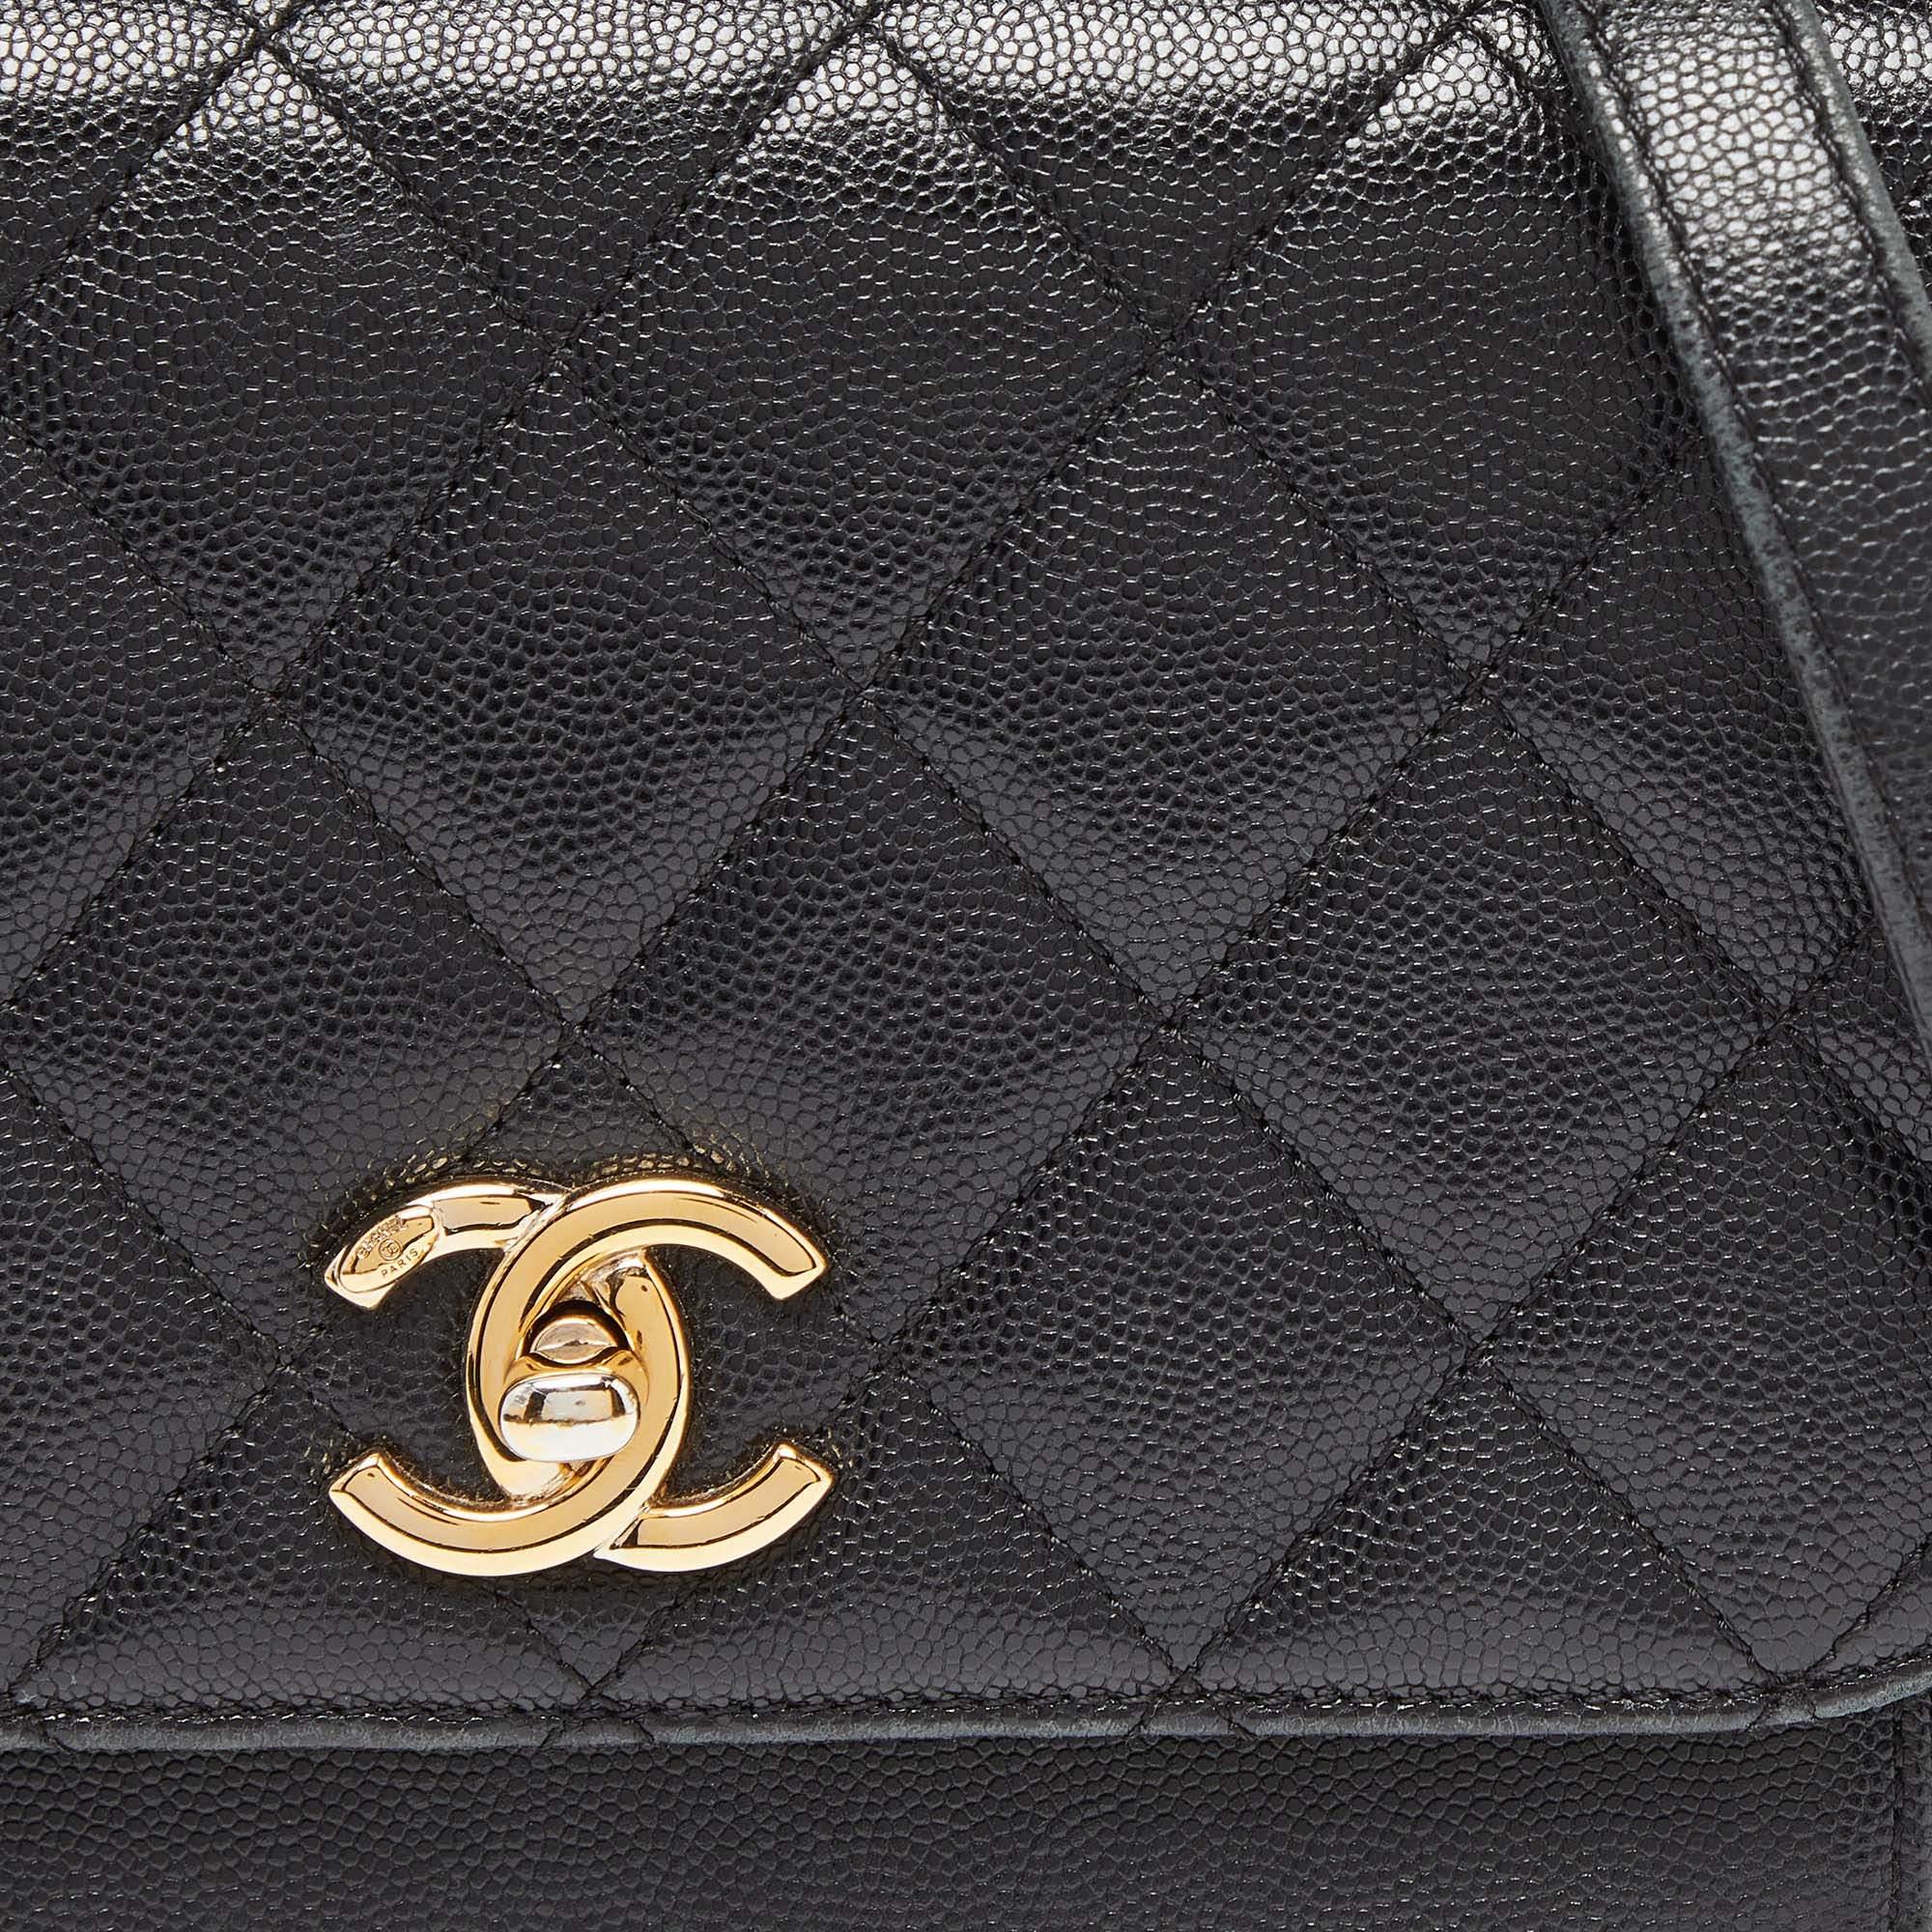 Chanel Black Caviar Leather Business Affinity Chain Flap Bag For Sale 7